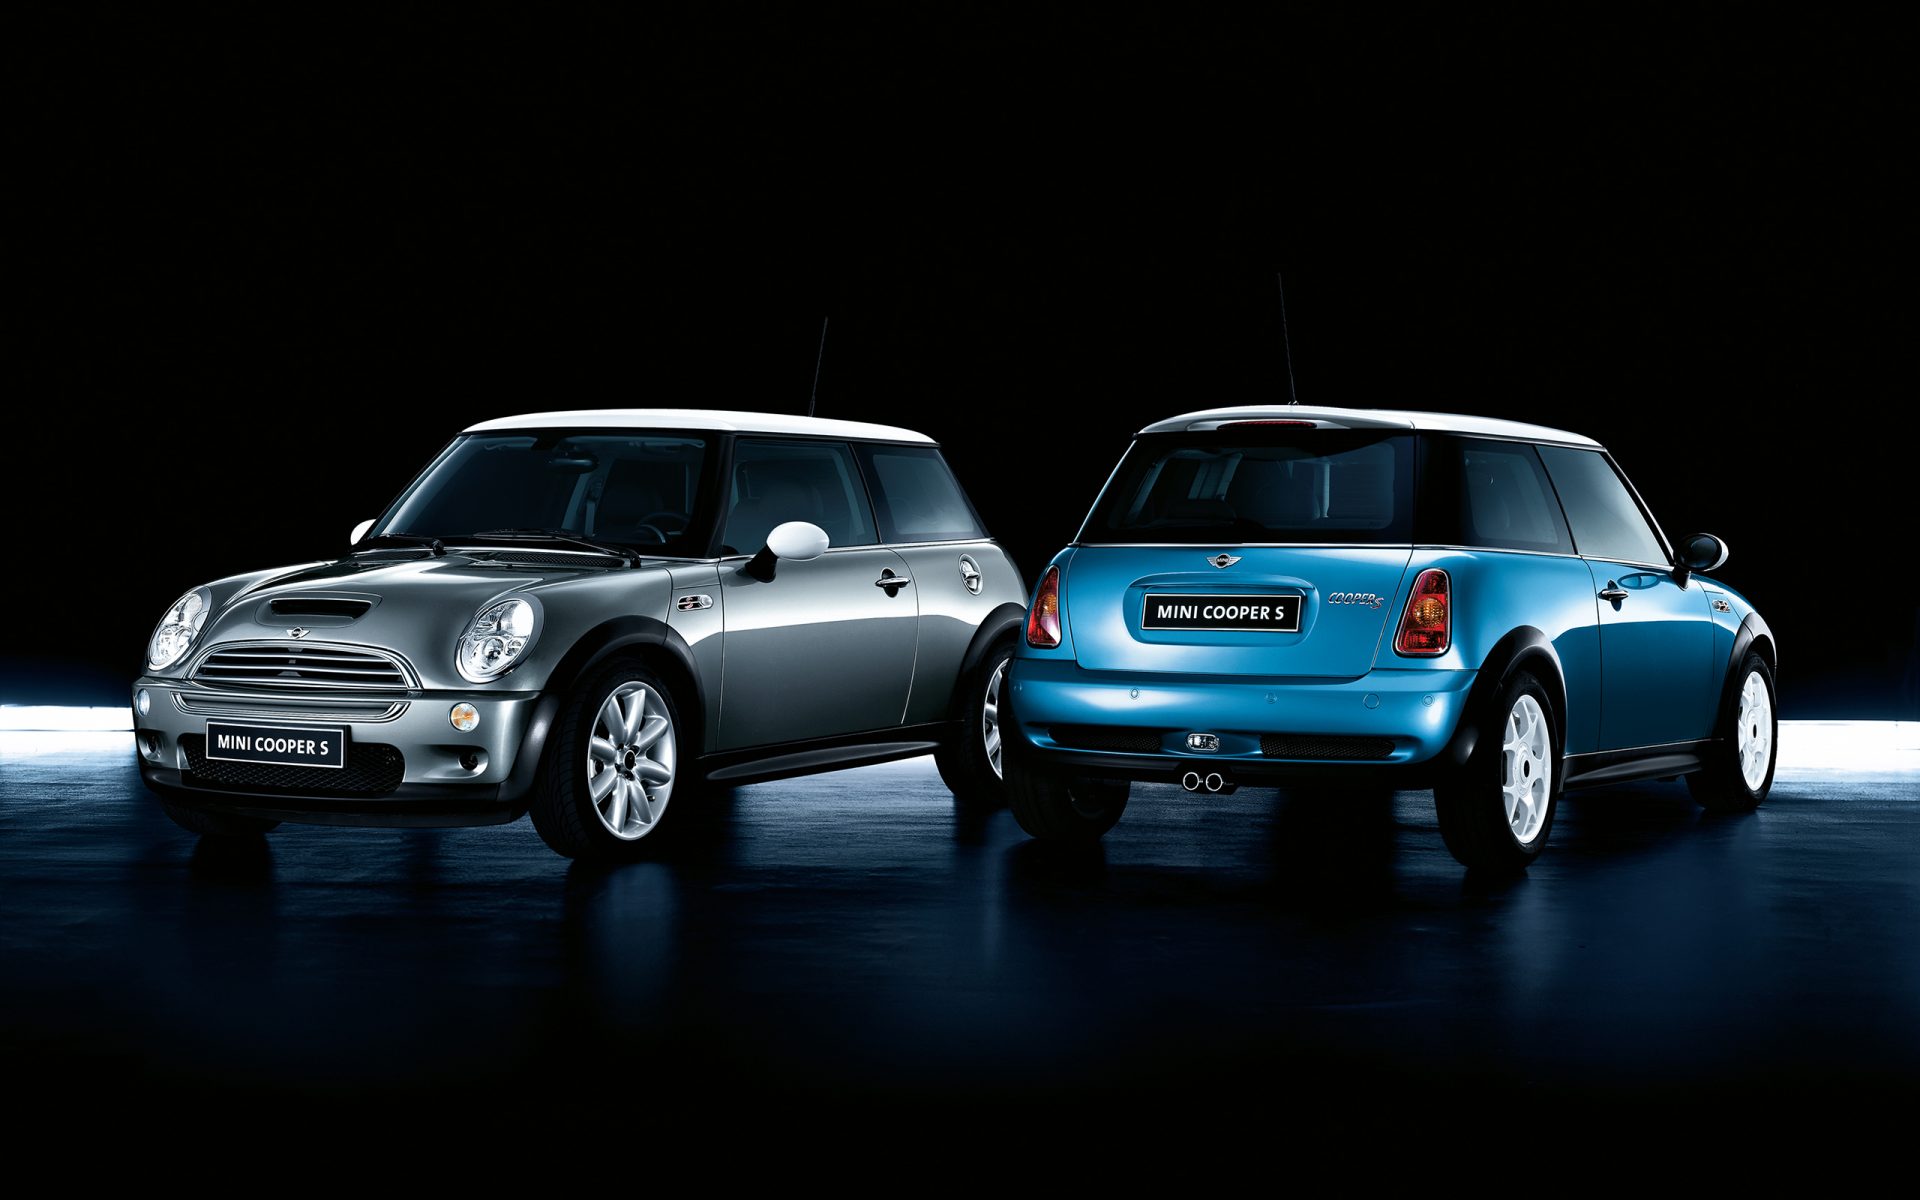 The new MINI becomes the first premium vehicle in the small car segment.